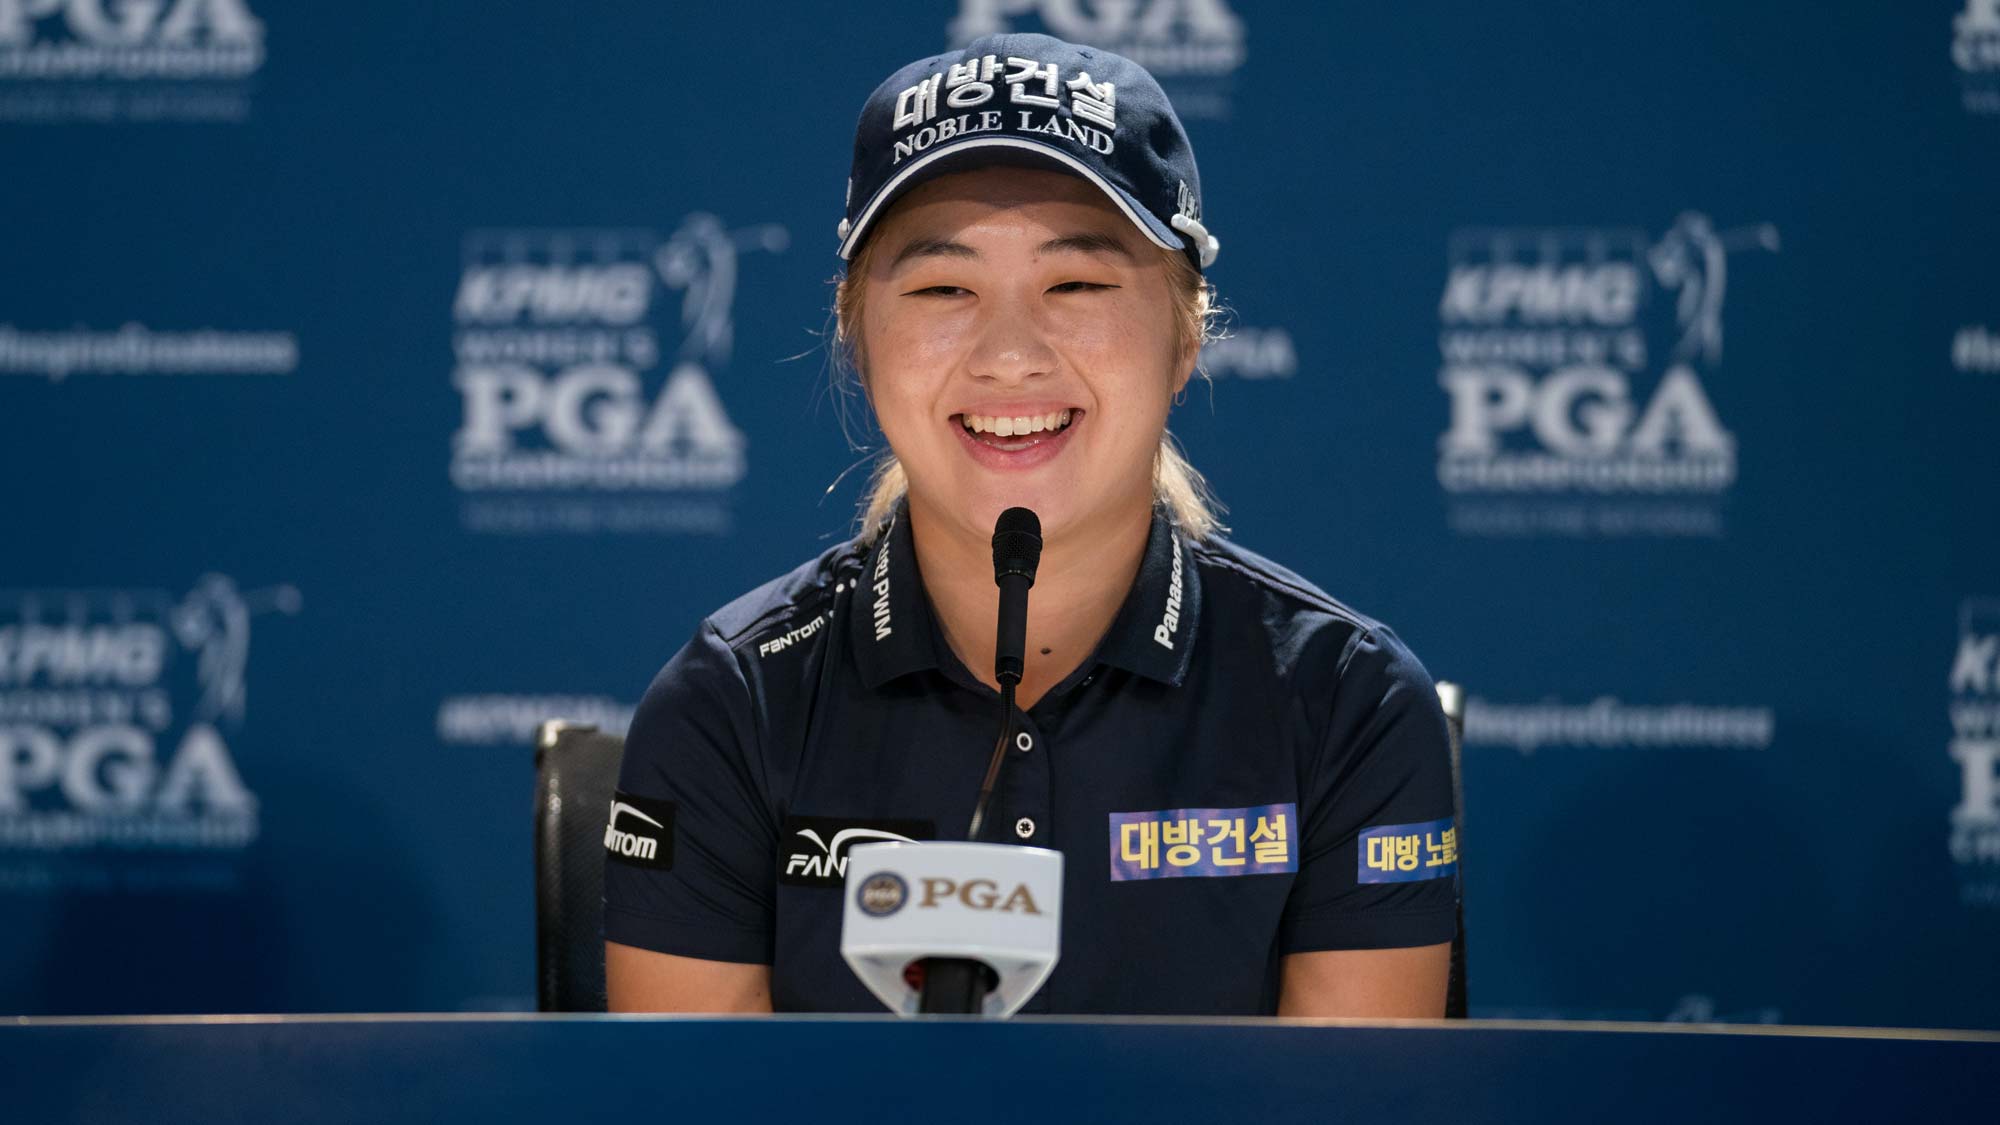 Jeongeun Lee6 of the Republic of Korea speaks at a press conference during the practice round for the 65th KPMG Women’s PGA Championship